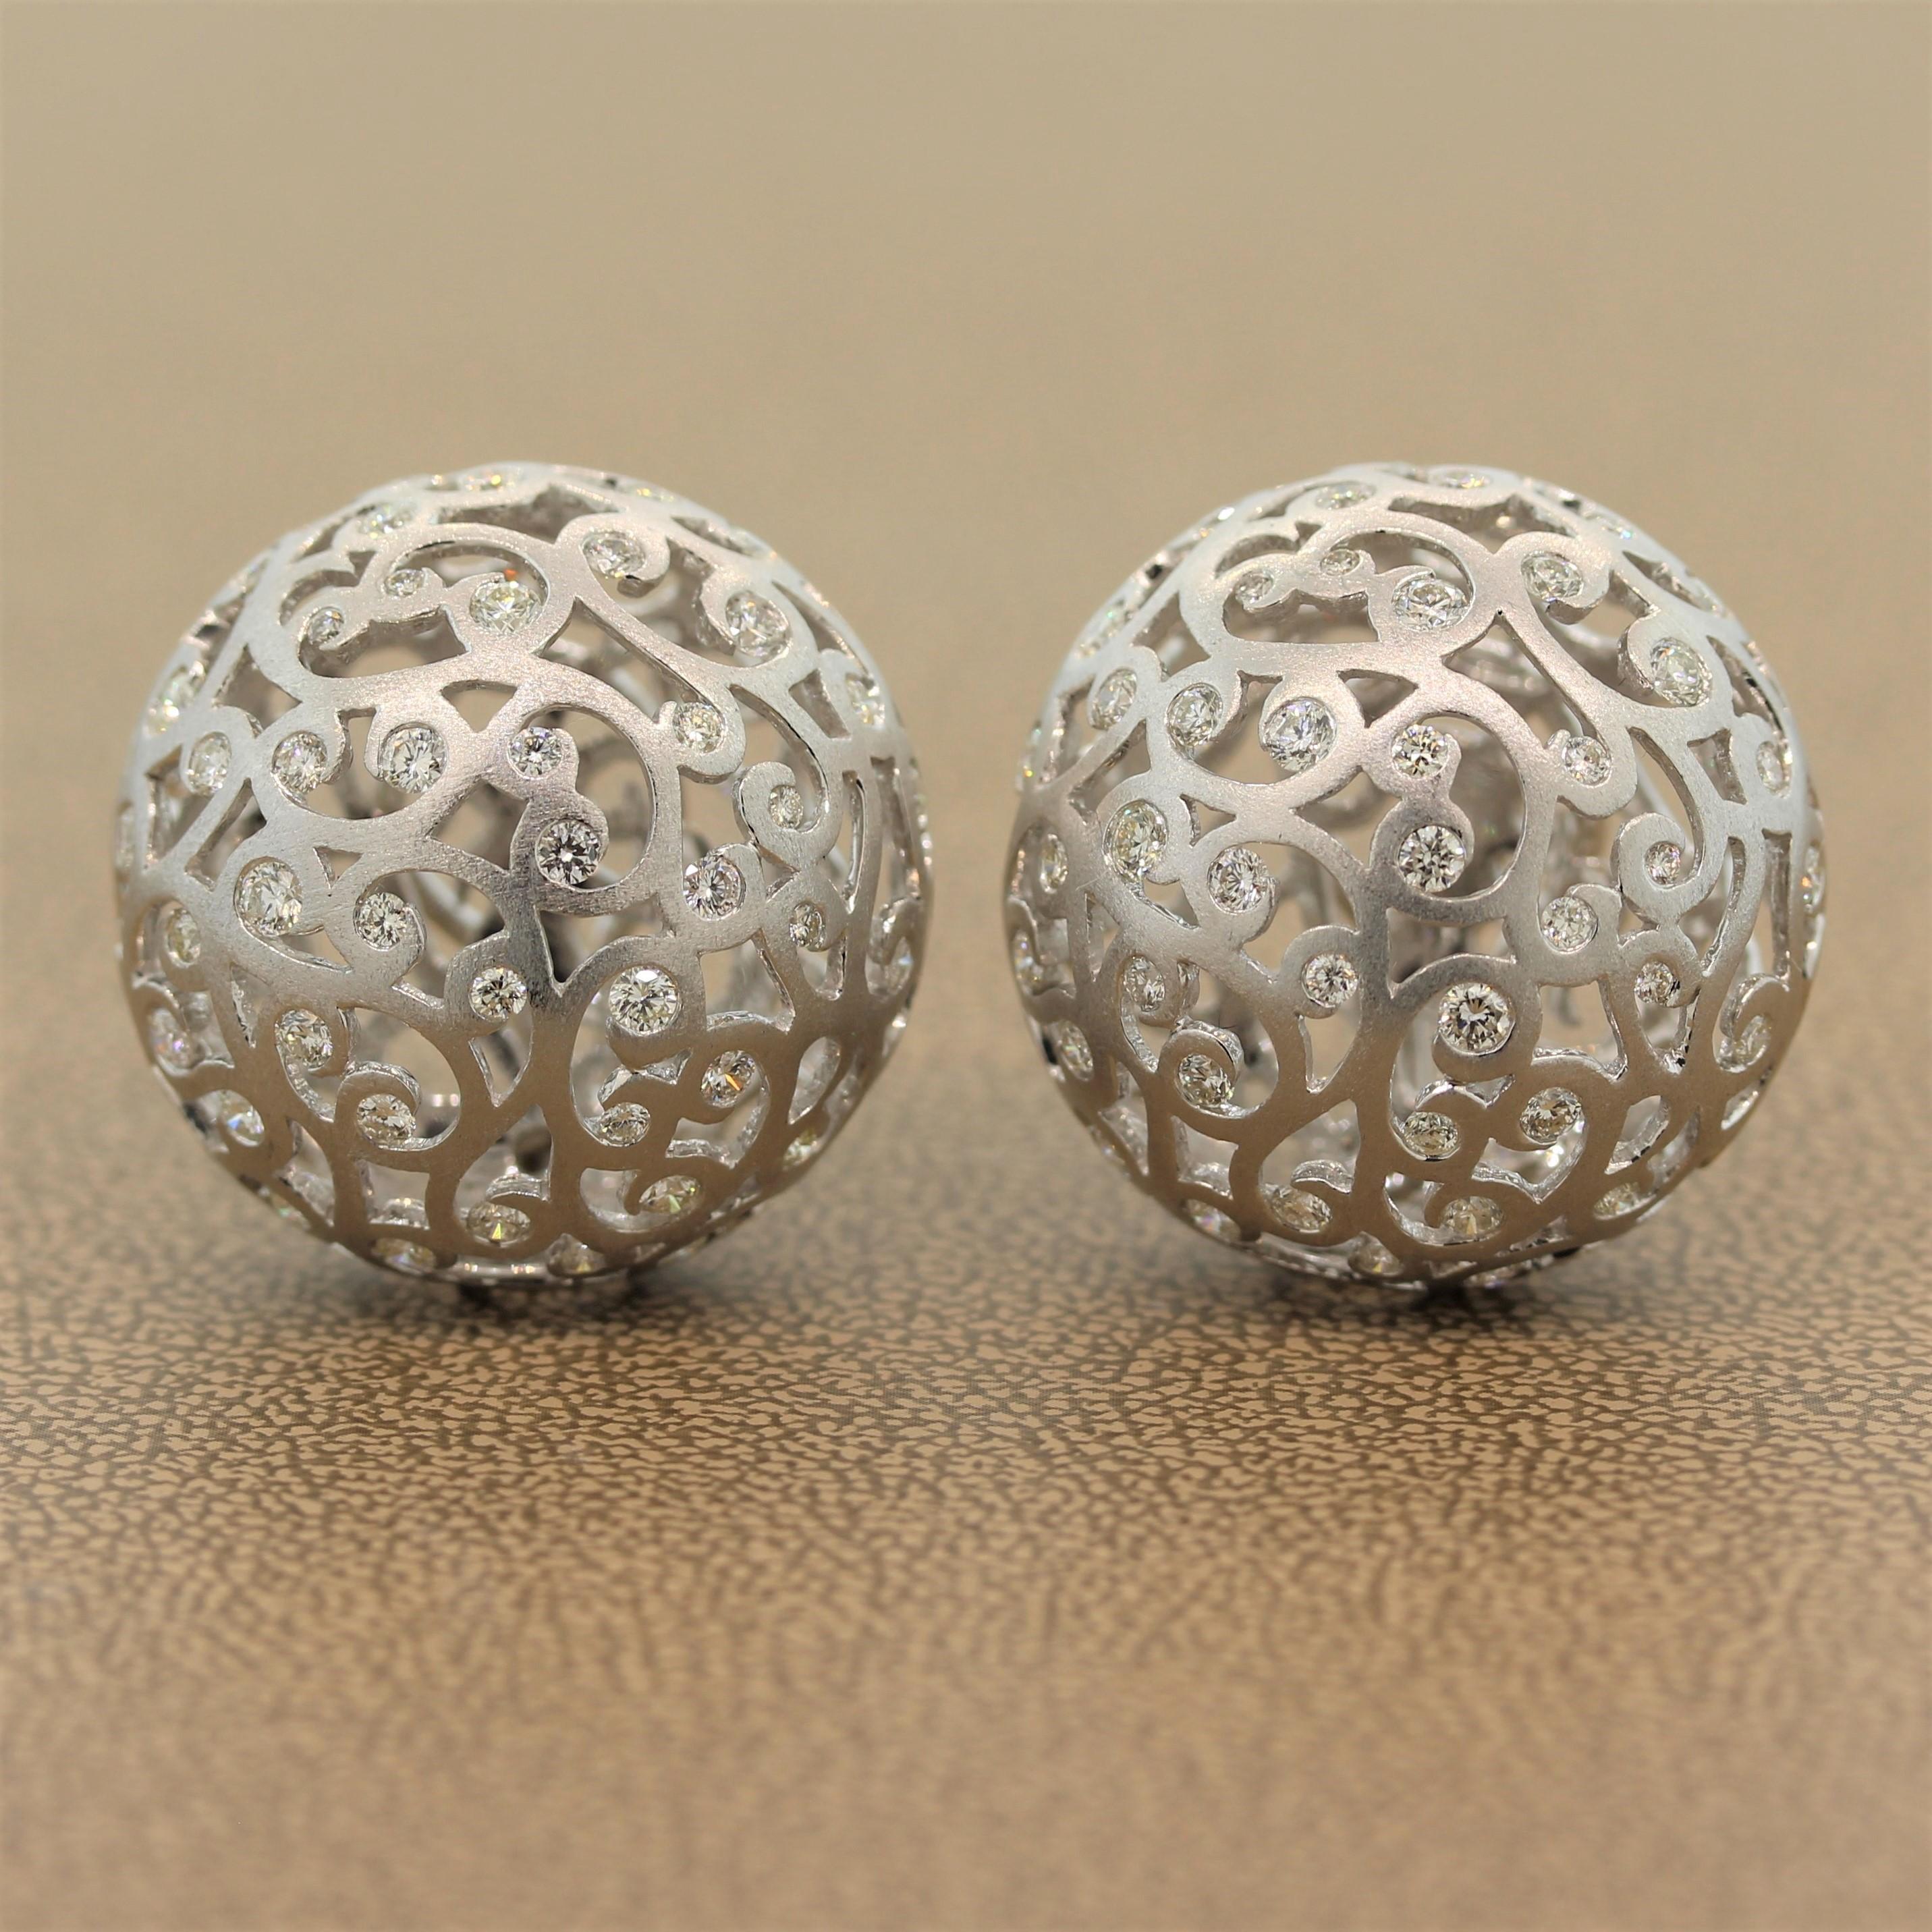 A fun and elegant pair of earrings featuring 2.32 carats of VS quality diamonds hugged by the filigree design of each 18K white gold sphere. The brushed finished domes are lightweight with an omega clip backing.   

Earring Circumference: 0.80